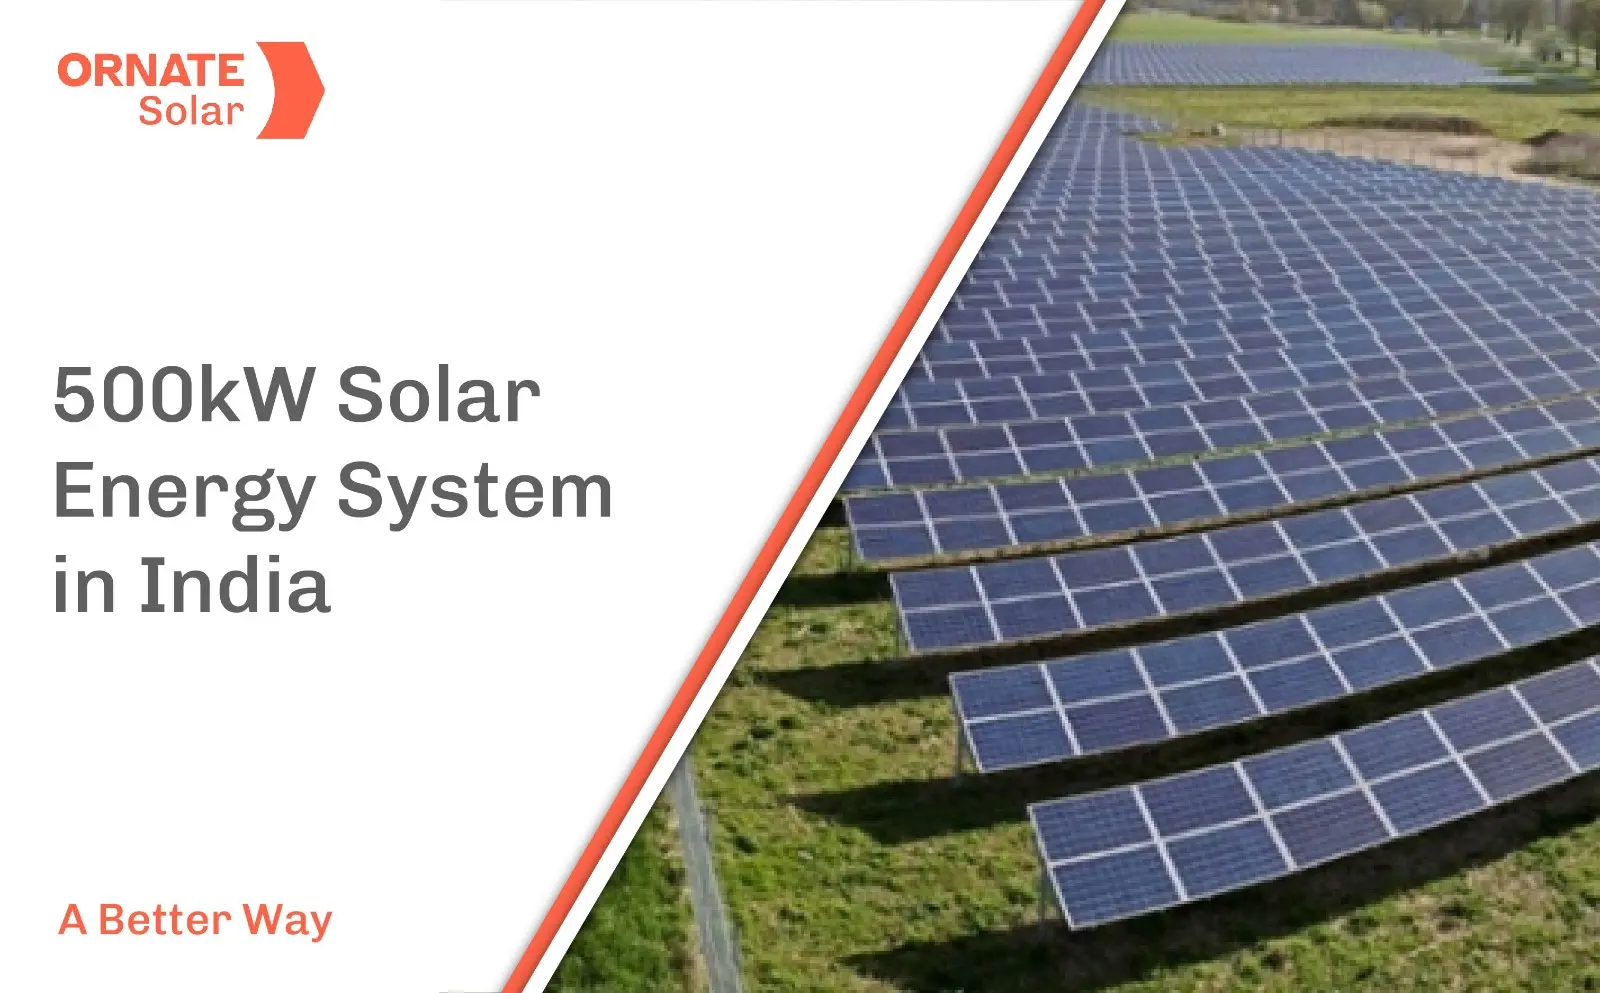 500 kw solar panel price in india - How big is a 500 kw solar system